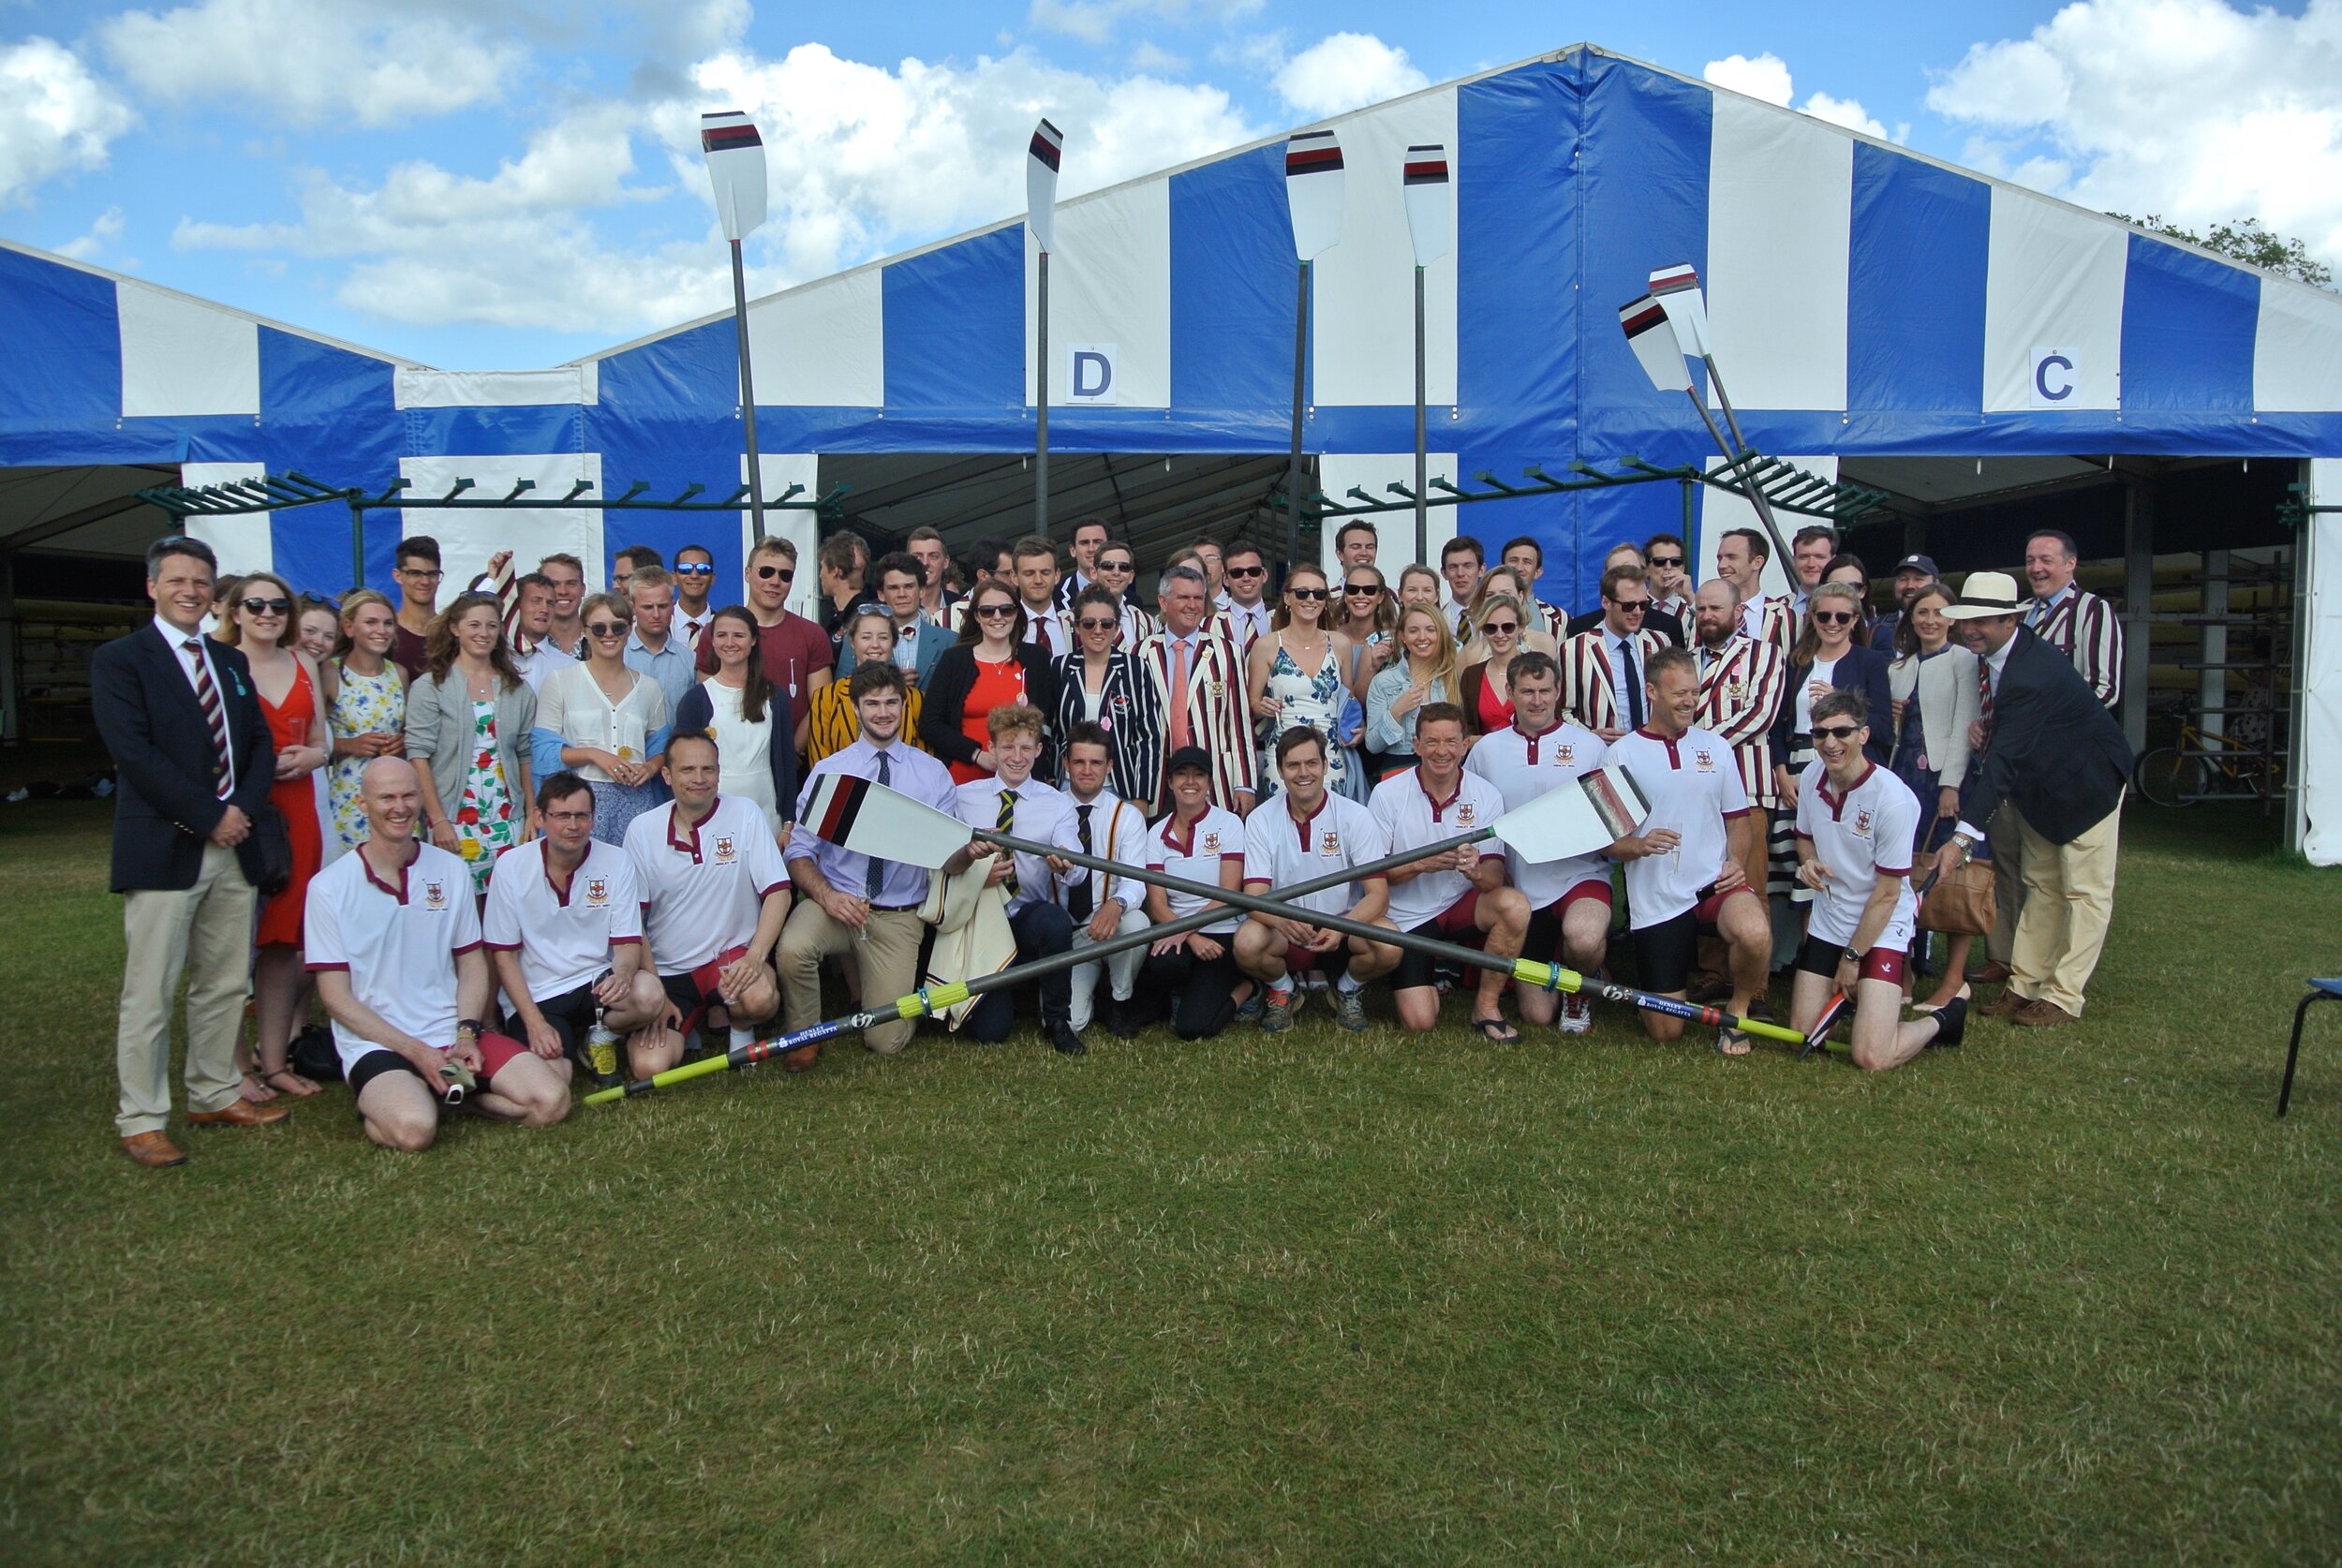  Piers (kneeling front row, second from right) with UBBC students and alumni at HRR 2016  